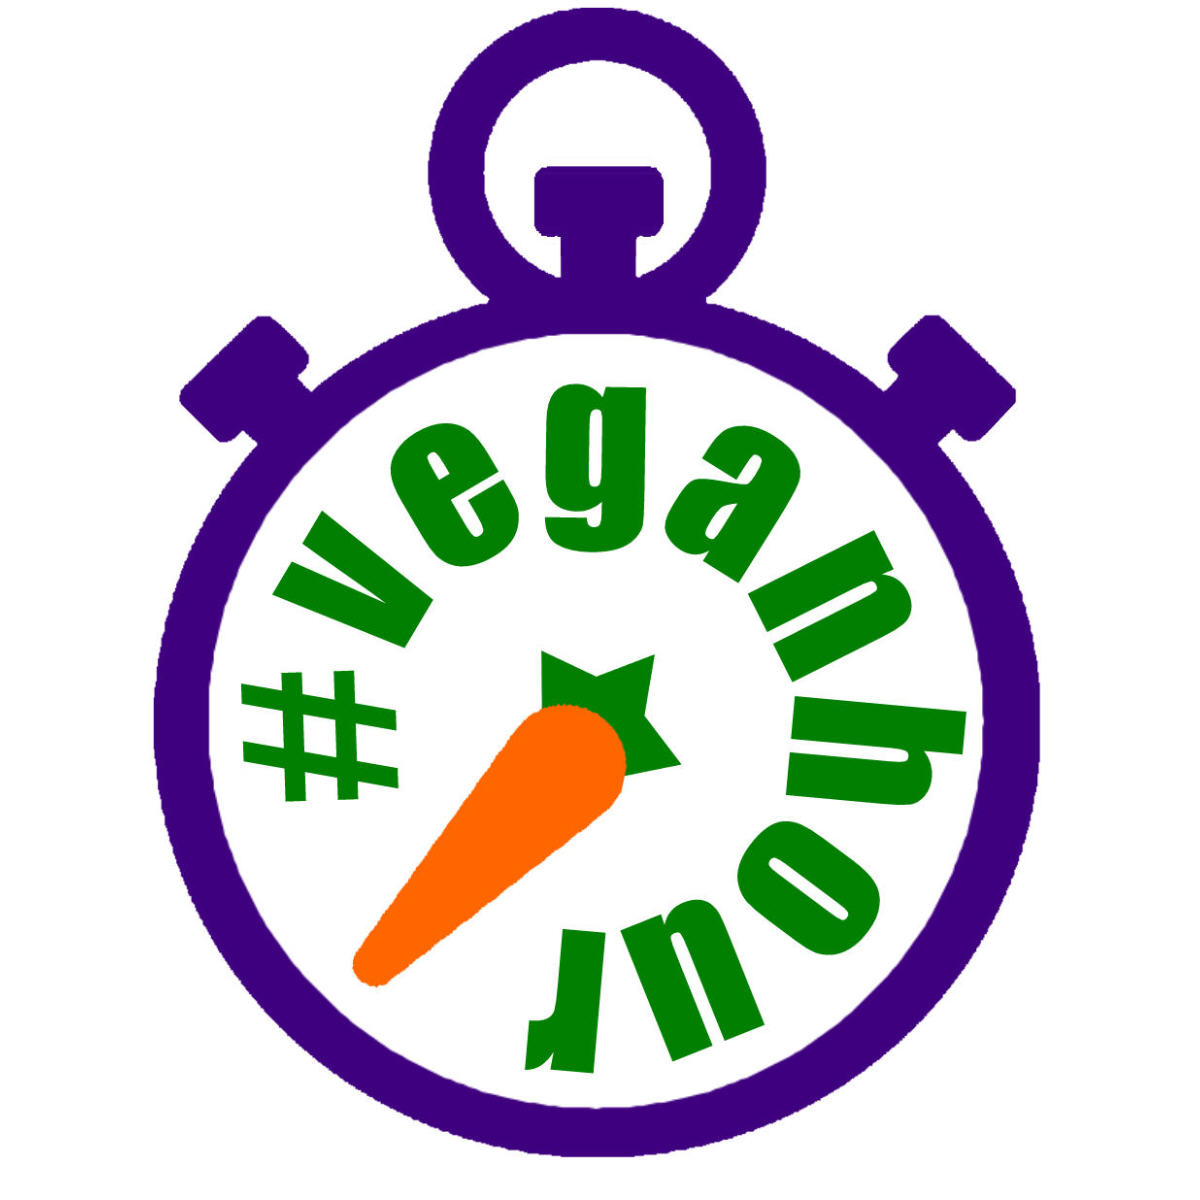 A sunny day today. 🌞

And now it's time for this week's #VeganHour! 😎

Join in the #vegan friendly chat... 🗨 

1. Search #veganhour
2. Select 'Latest'
3. Add #veganhour to your tweets! 

🗨 🇻 🇪 🇬 🇦 🇳 🌱